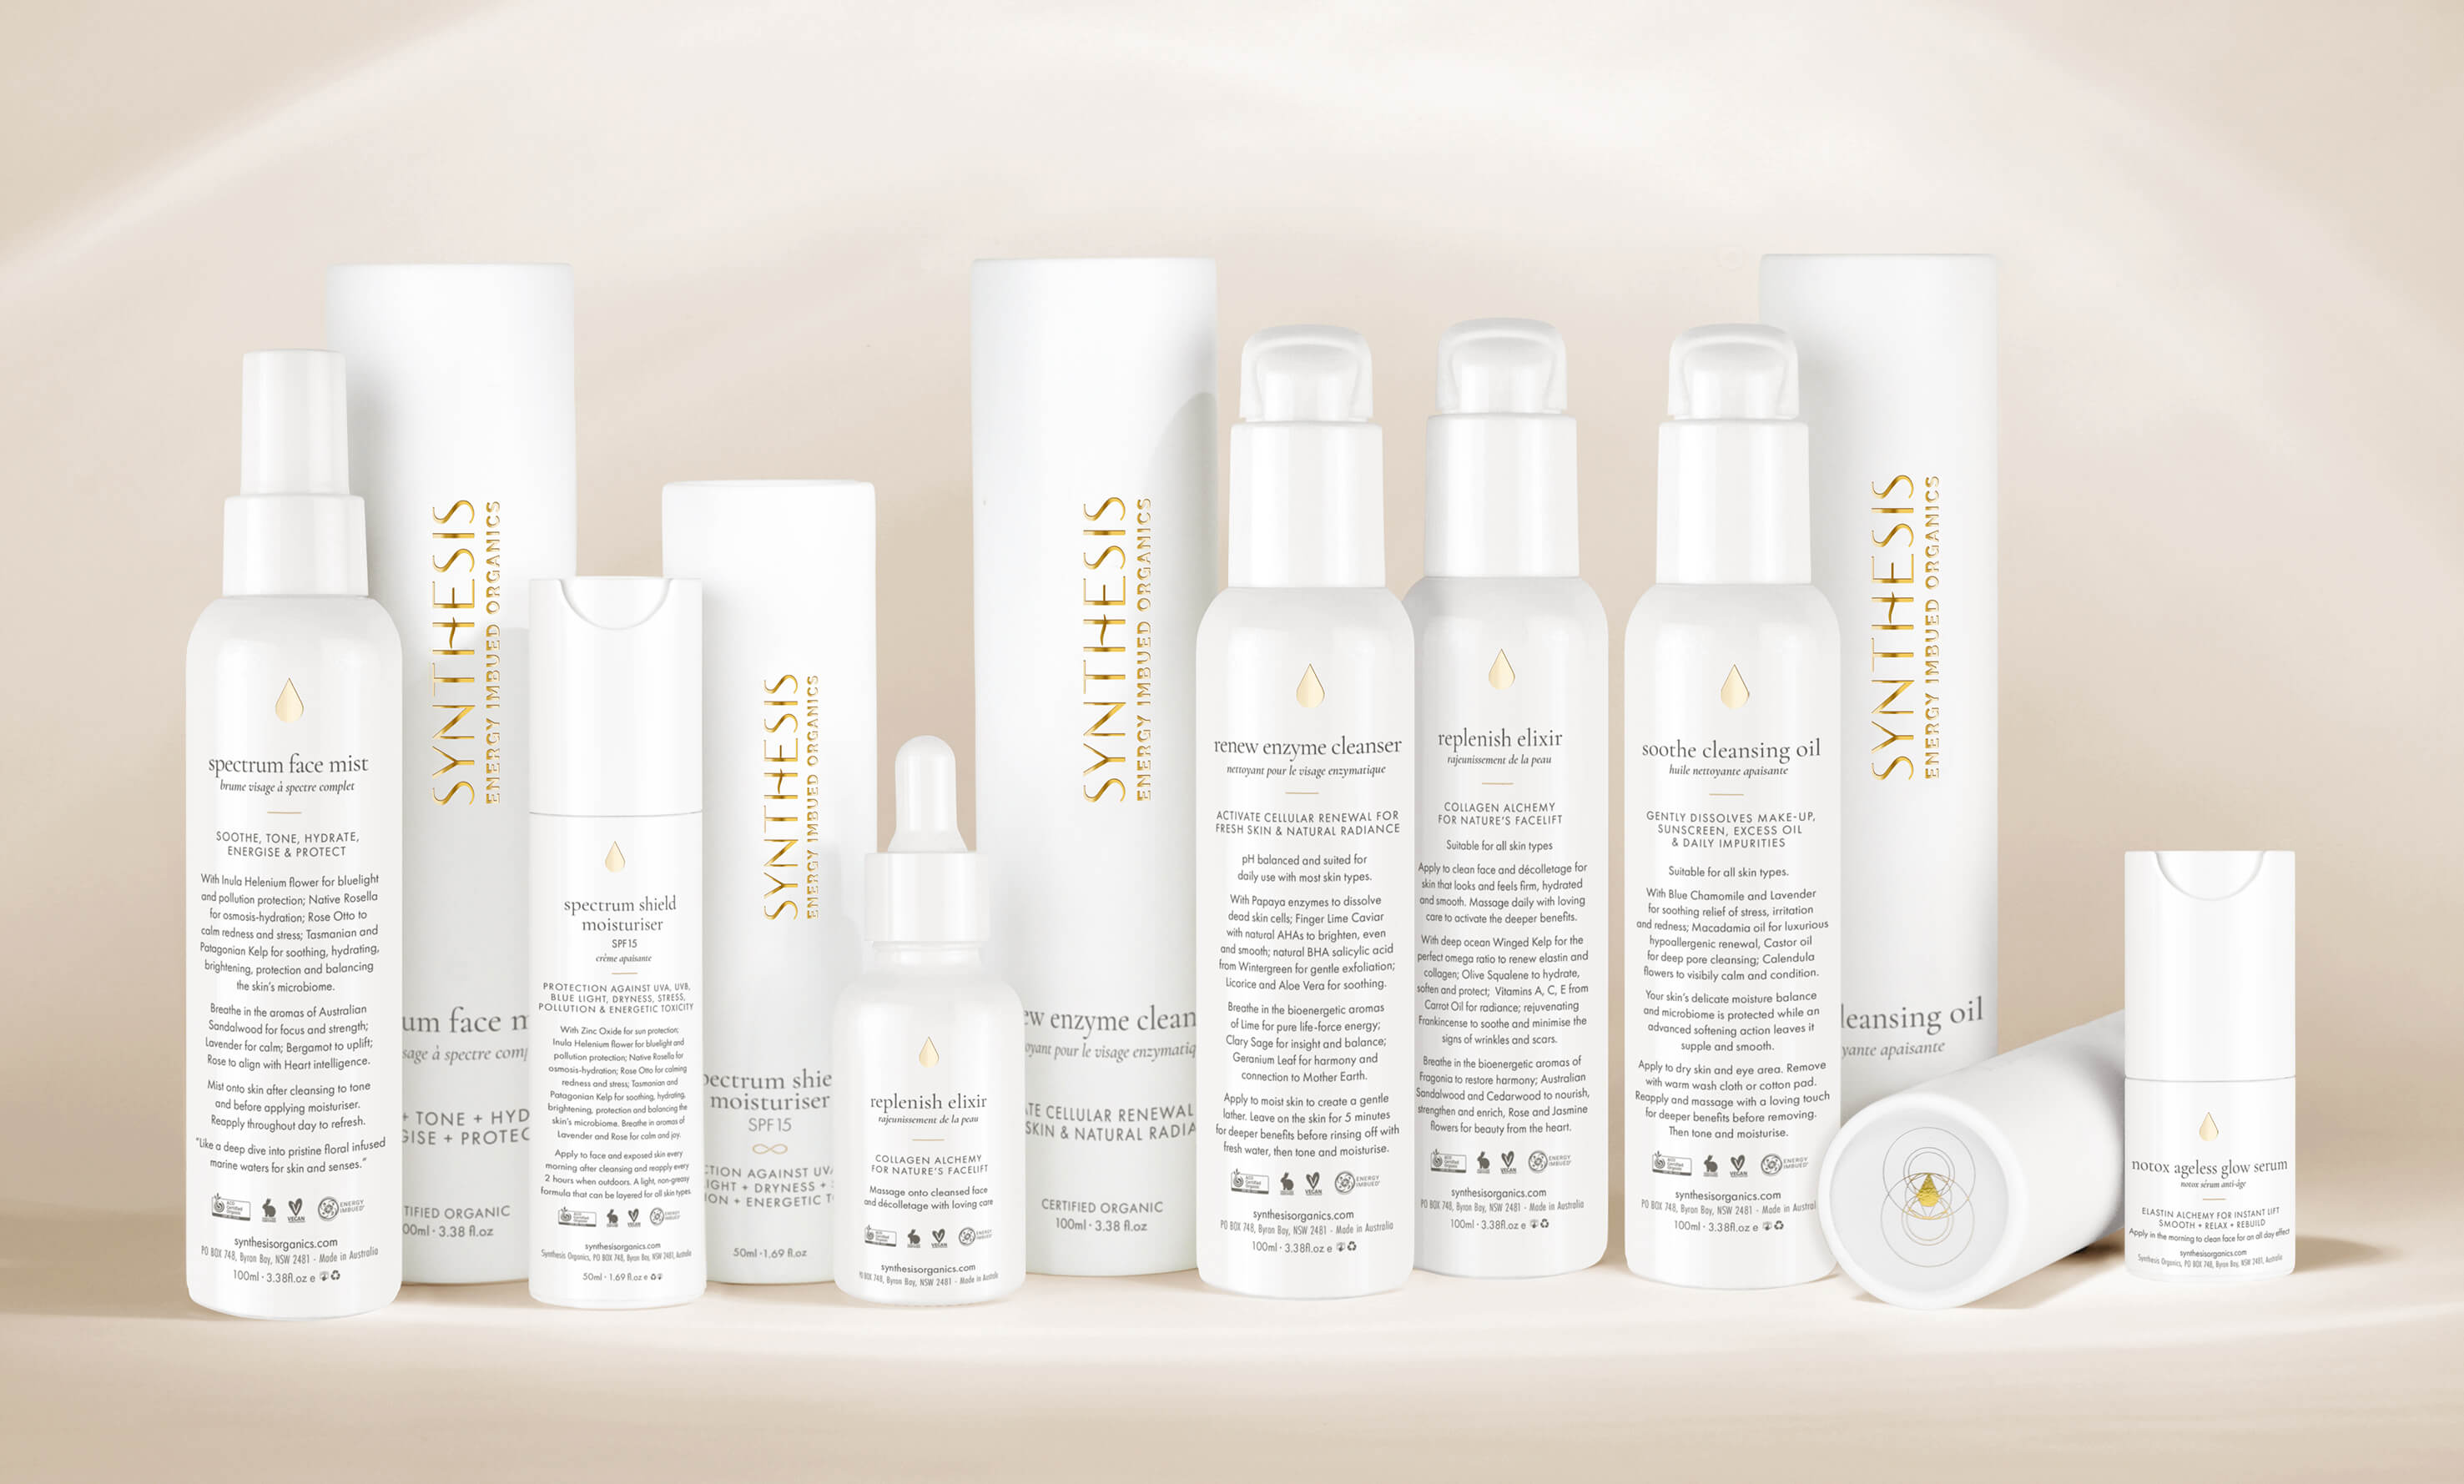 Our new bioenergetic skincare line redefines holistic beauty